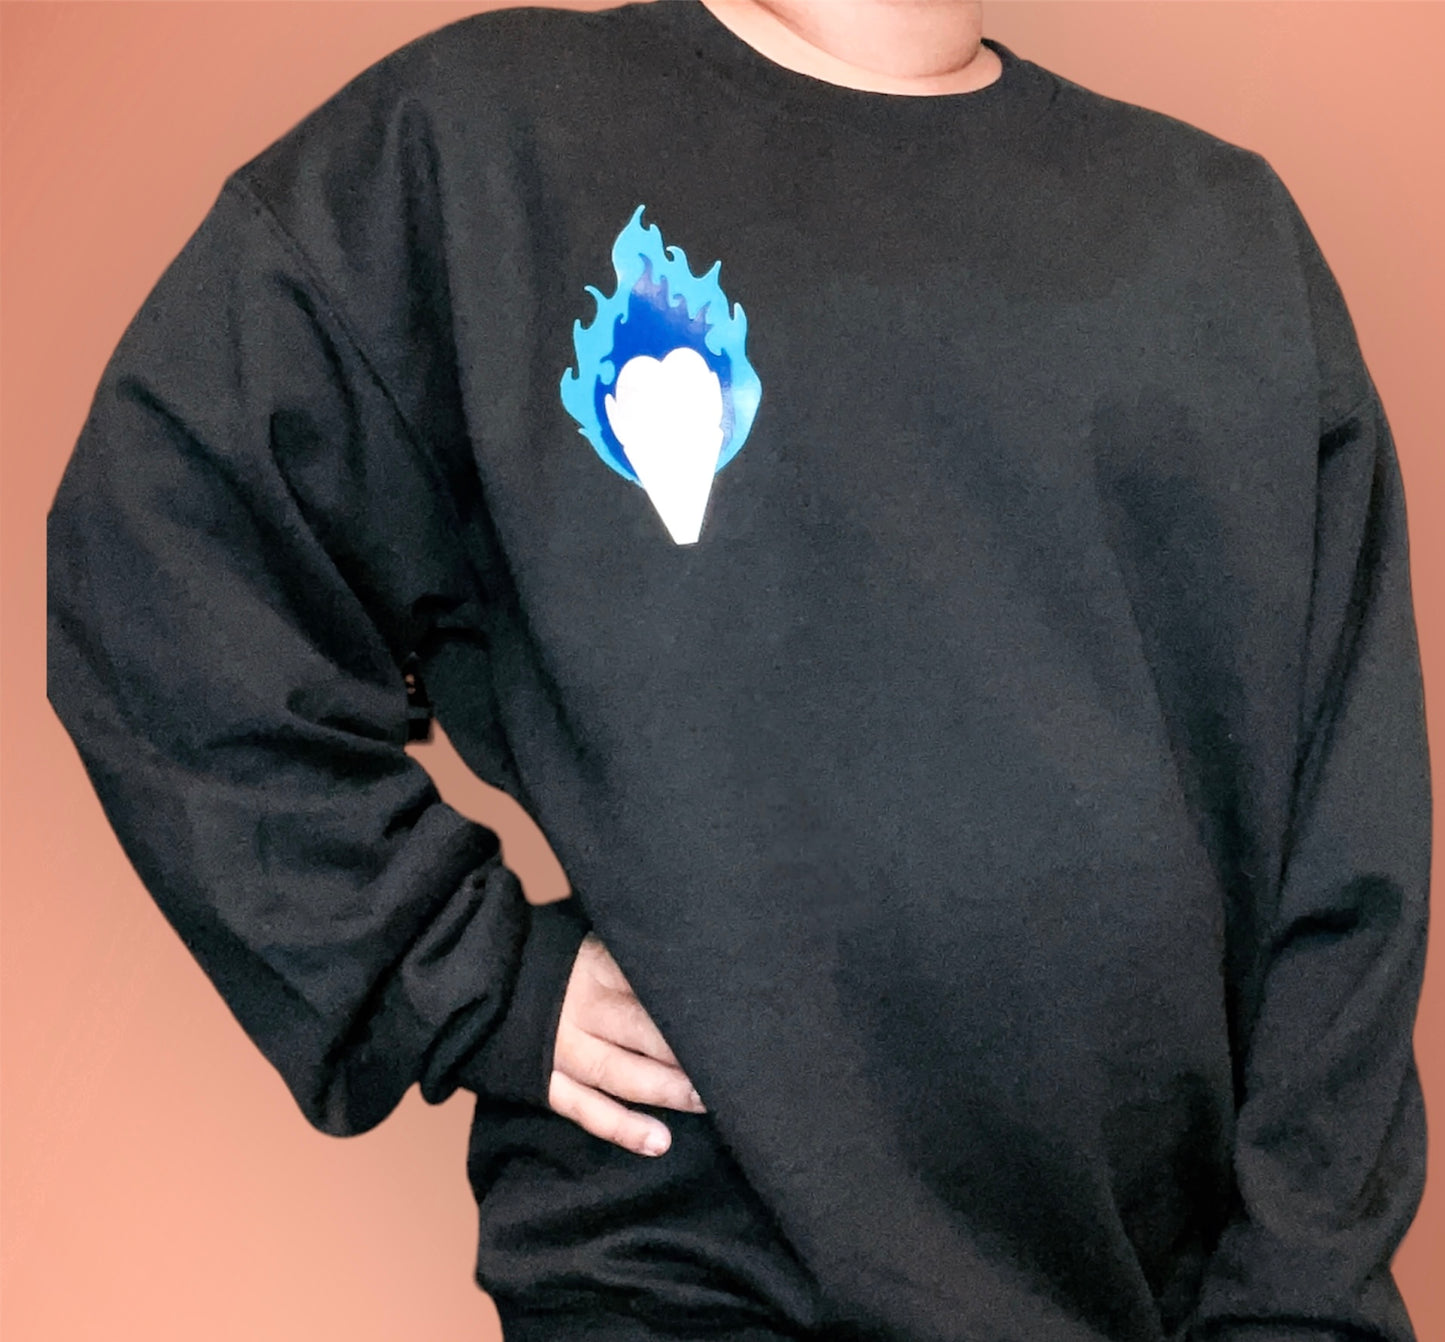 Hercules and Hades Logo Unisex Pullover Sweater - Comfy Cotton Stretch Crew Neck Sweatshirt